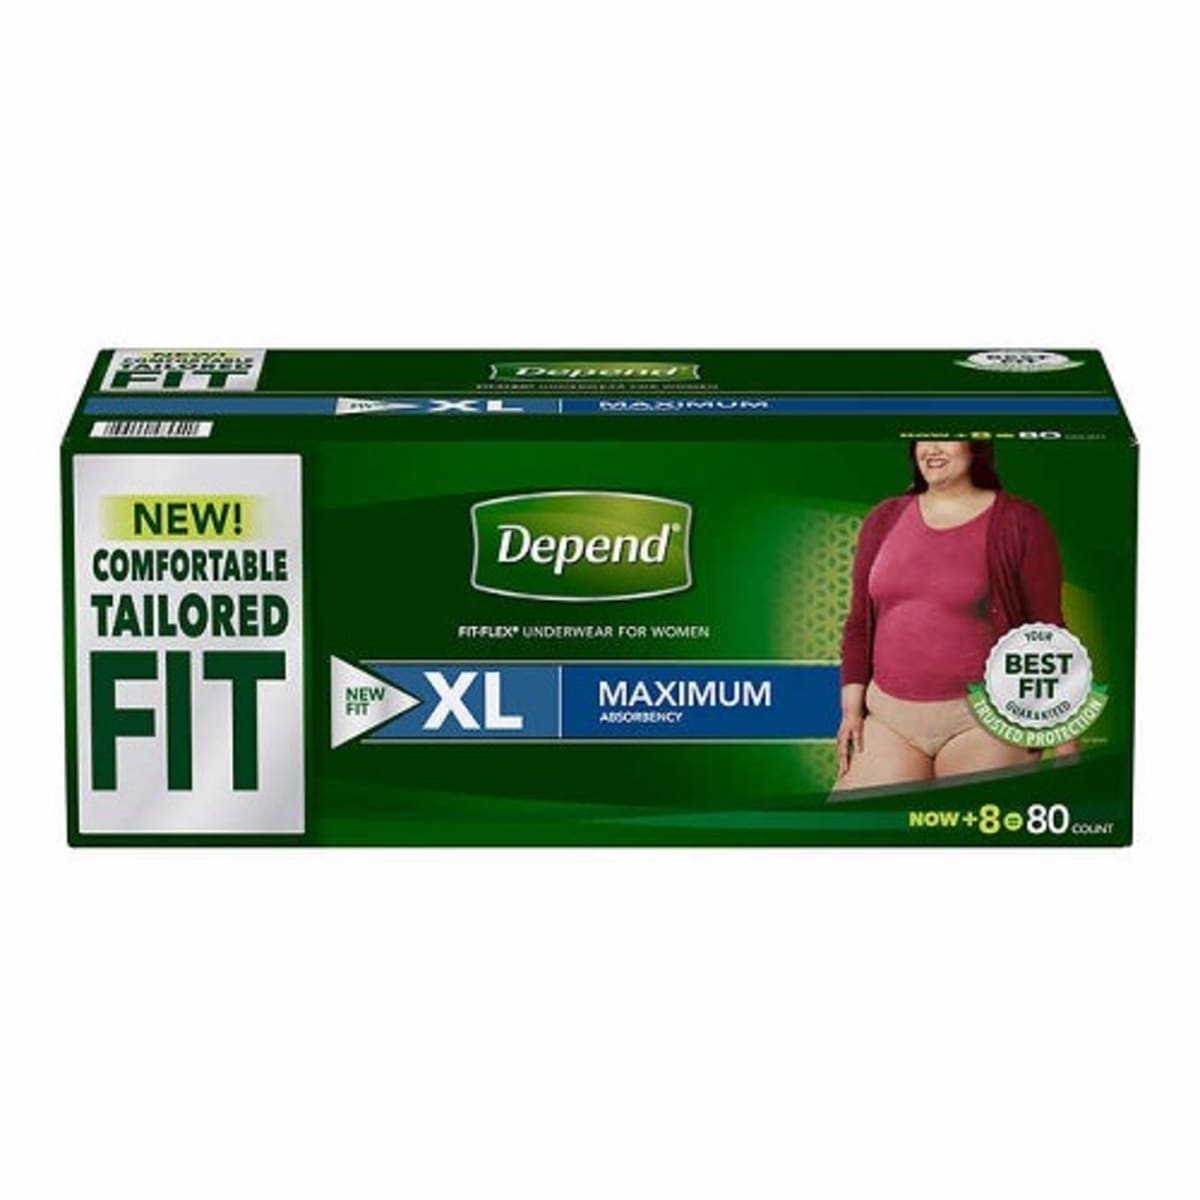  Depend Protection Plus Ultimate Max Absorbency 3-in-1 SureFit  Flexible Underwear for Men:92 count, S-M : Health & Household